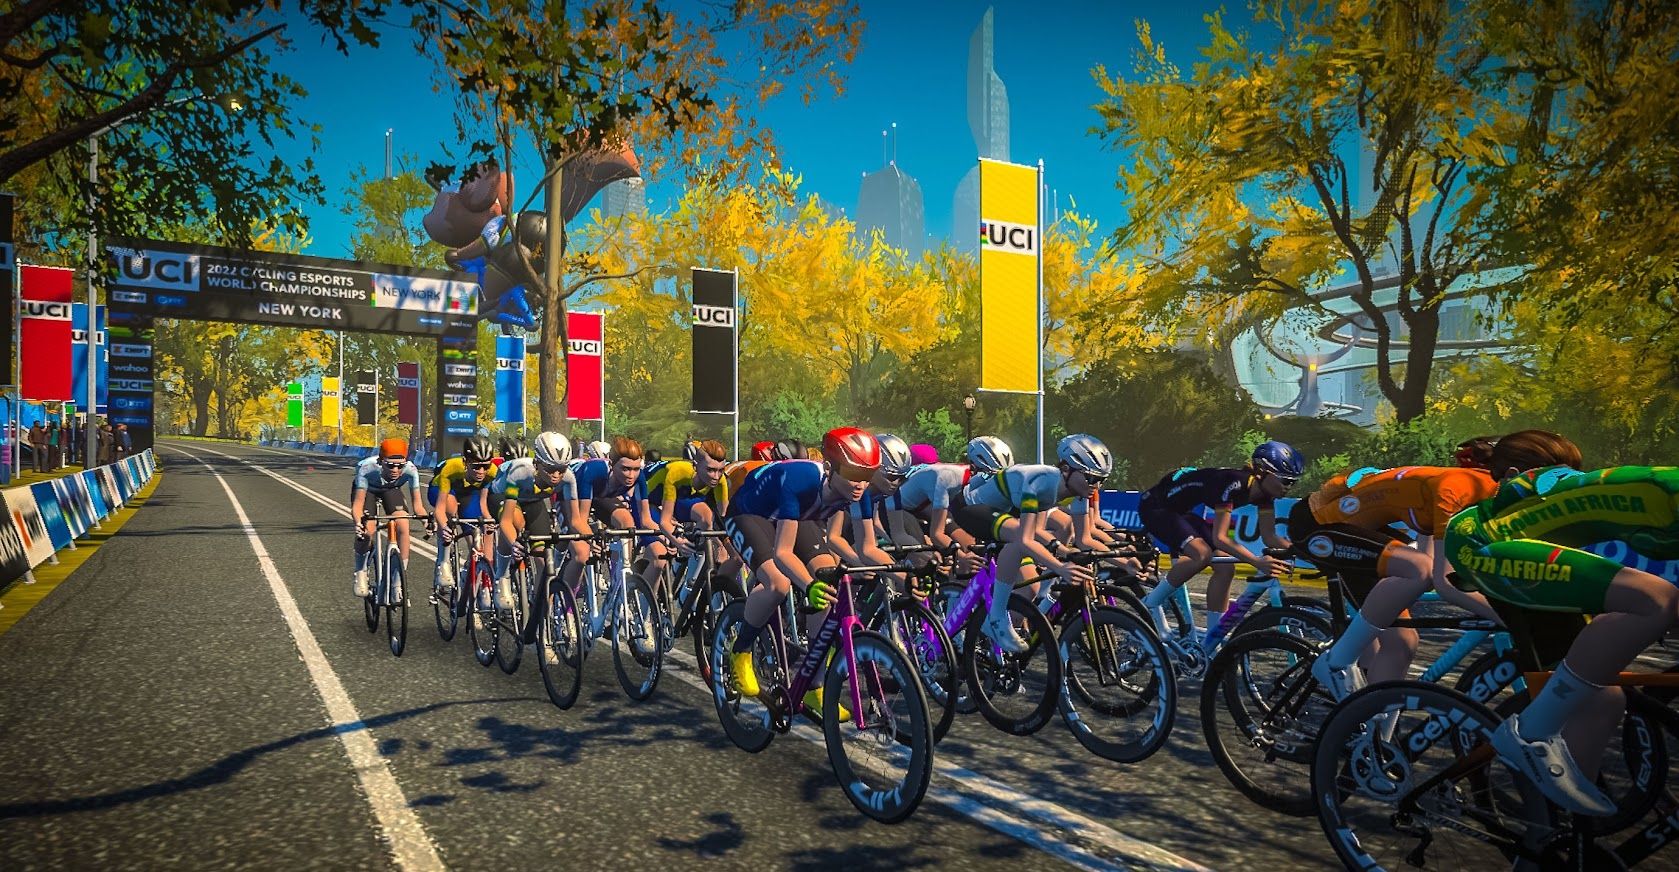 Competitors challenge Zwift's dominance in virtual cycling as UCI